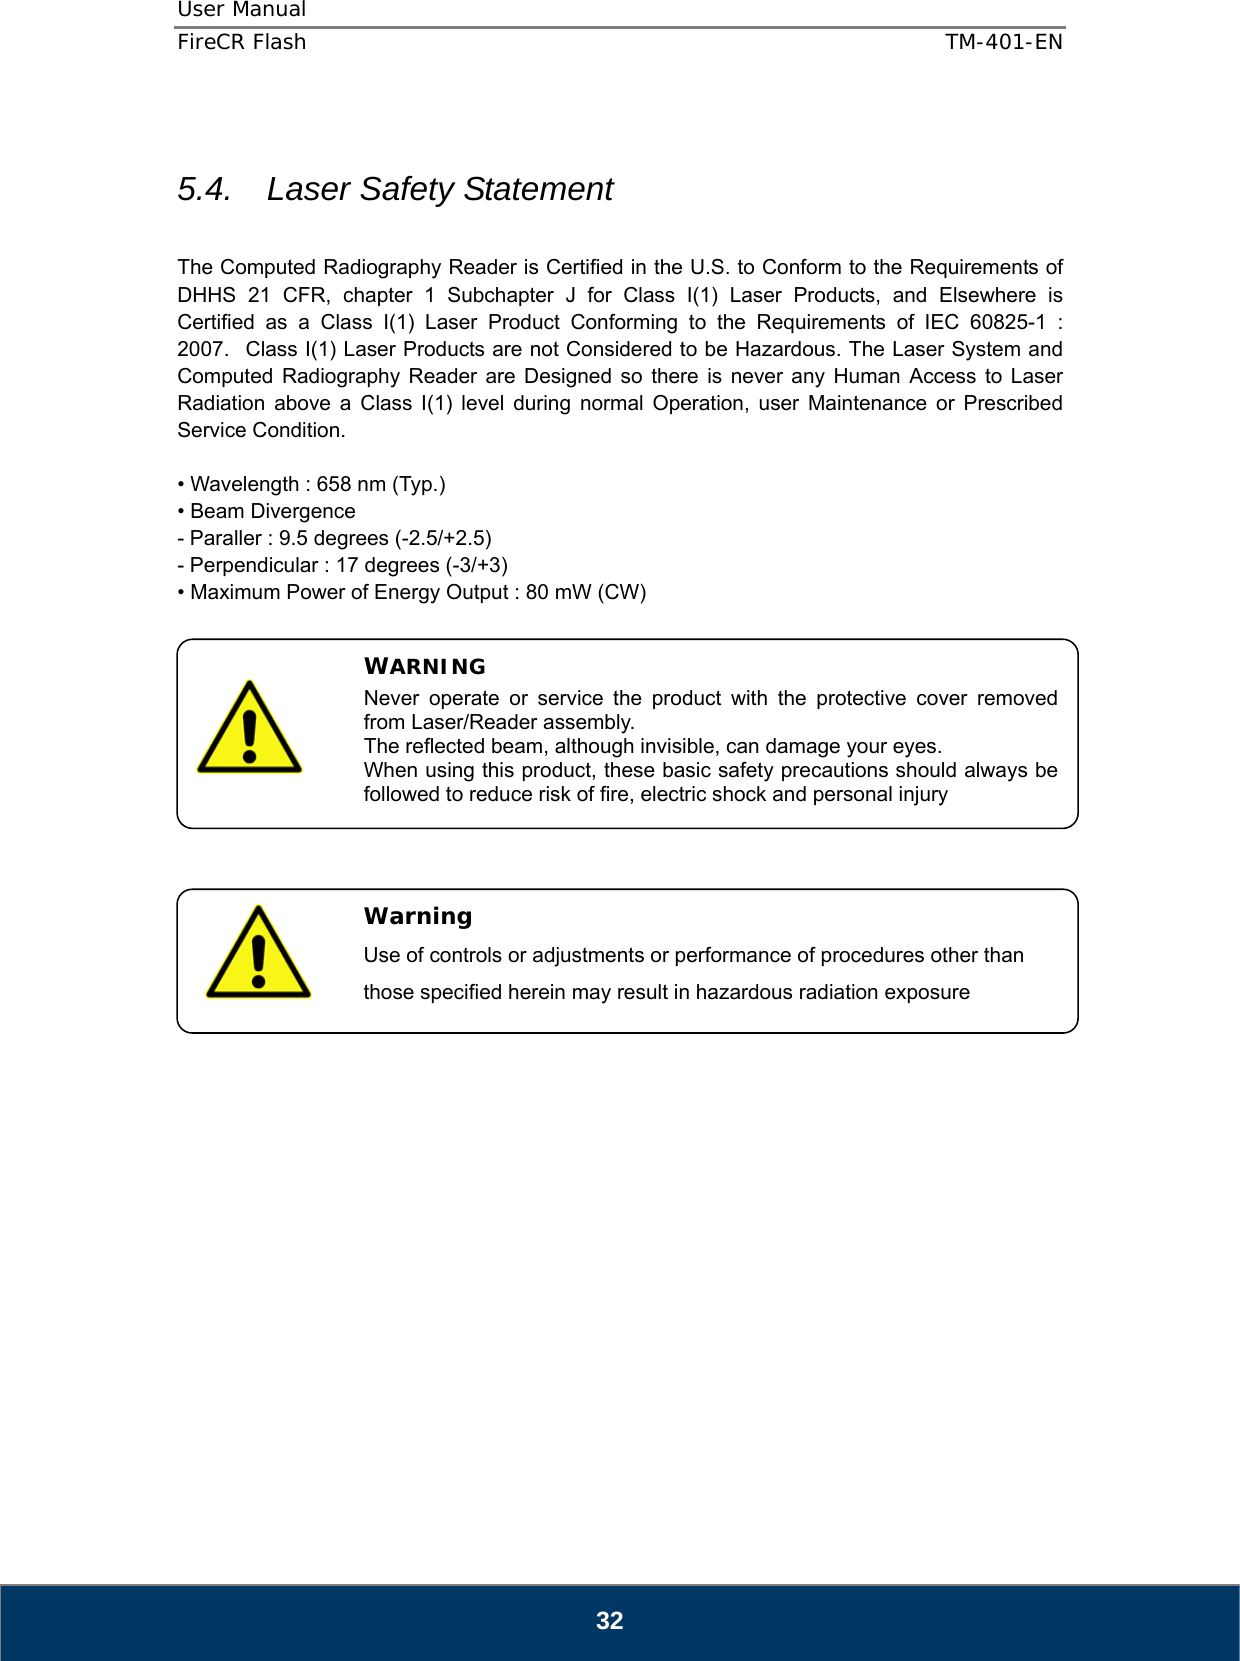 User Manual  FireCR Flash    TM-401-EN   32  5.4.   Laser Safety Statement      The Computed Radiography Reader is Certified in the U.S. to Conform to the Requirements of DHHS 21 CFR, chapter 1 Subchapter J for Class I(1) Laser Products, and Elsewhere is Certified as a Class I(1) Laser Product Conforming to the Requirements of IEC 60825-1 : 2007.   Class I(1) Laser Products are not Considered to be Hazardous. The Laser System and Computed Radiography Reader are Designed so there is never any Human Access to Laser Radiation above a Class I(1) level during normal Operation, user Maintenance or Prescribed Service Condition.  • Wavelength : 658 nm (Typ.) • Beam Divergence - Paraller : 9.5 degrees (-2.5/+2.5) - Perpendicular : 17 degrees (-3/+3) • Maximum Power of Energy Output : 80 mW (CW)                        WARNING Never operate or service the product with the protective cover removed from Laser/Reader assembly. The reflected beam, although invisible, can damage your eyes. When using this product, these basic safety precautions should always be followed to reduce risk of fire, electric shock and personal injury   Warning Use of controls or adjustments or performance of procedures other than those specified herein may result in hazardous radiation exposure 